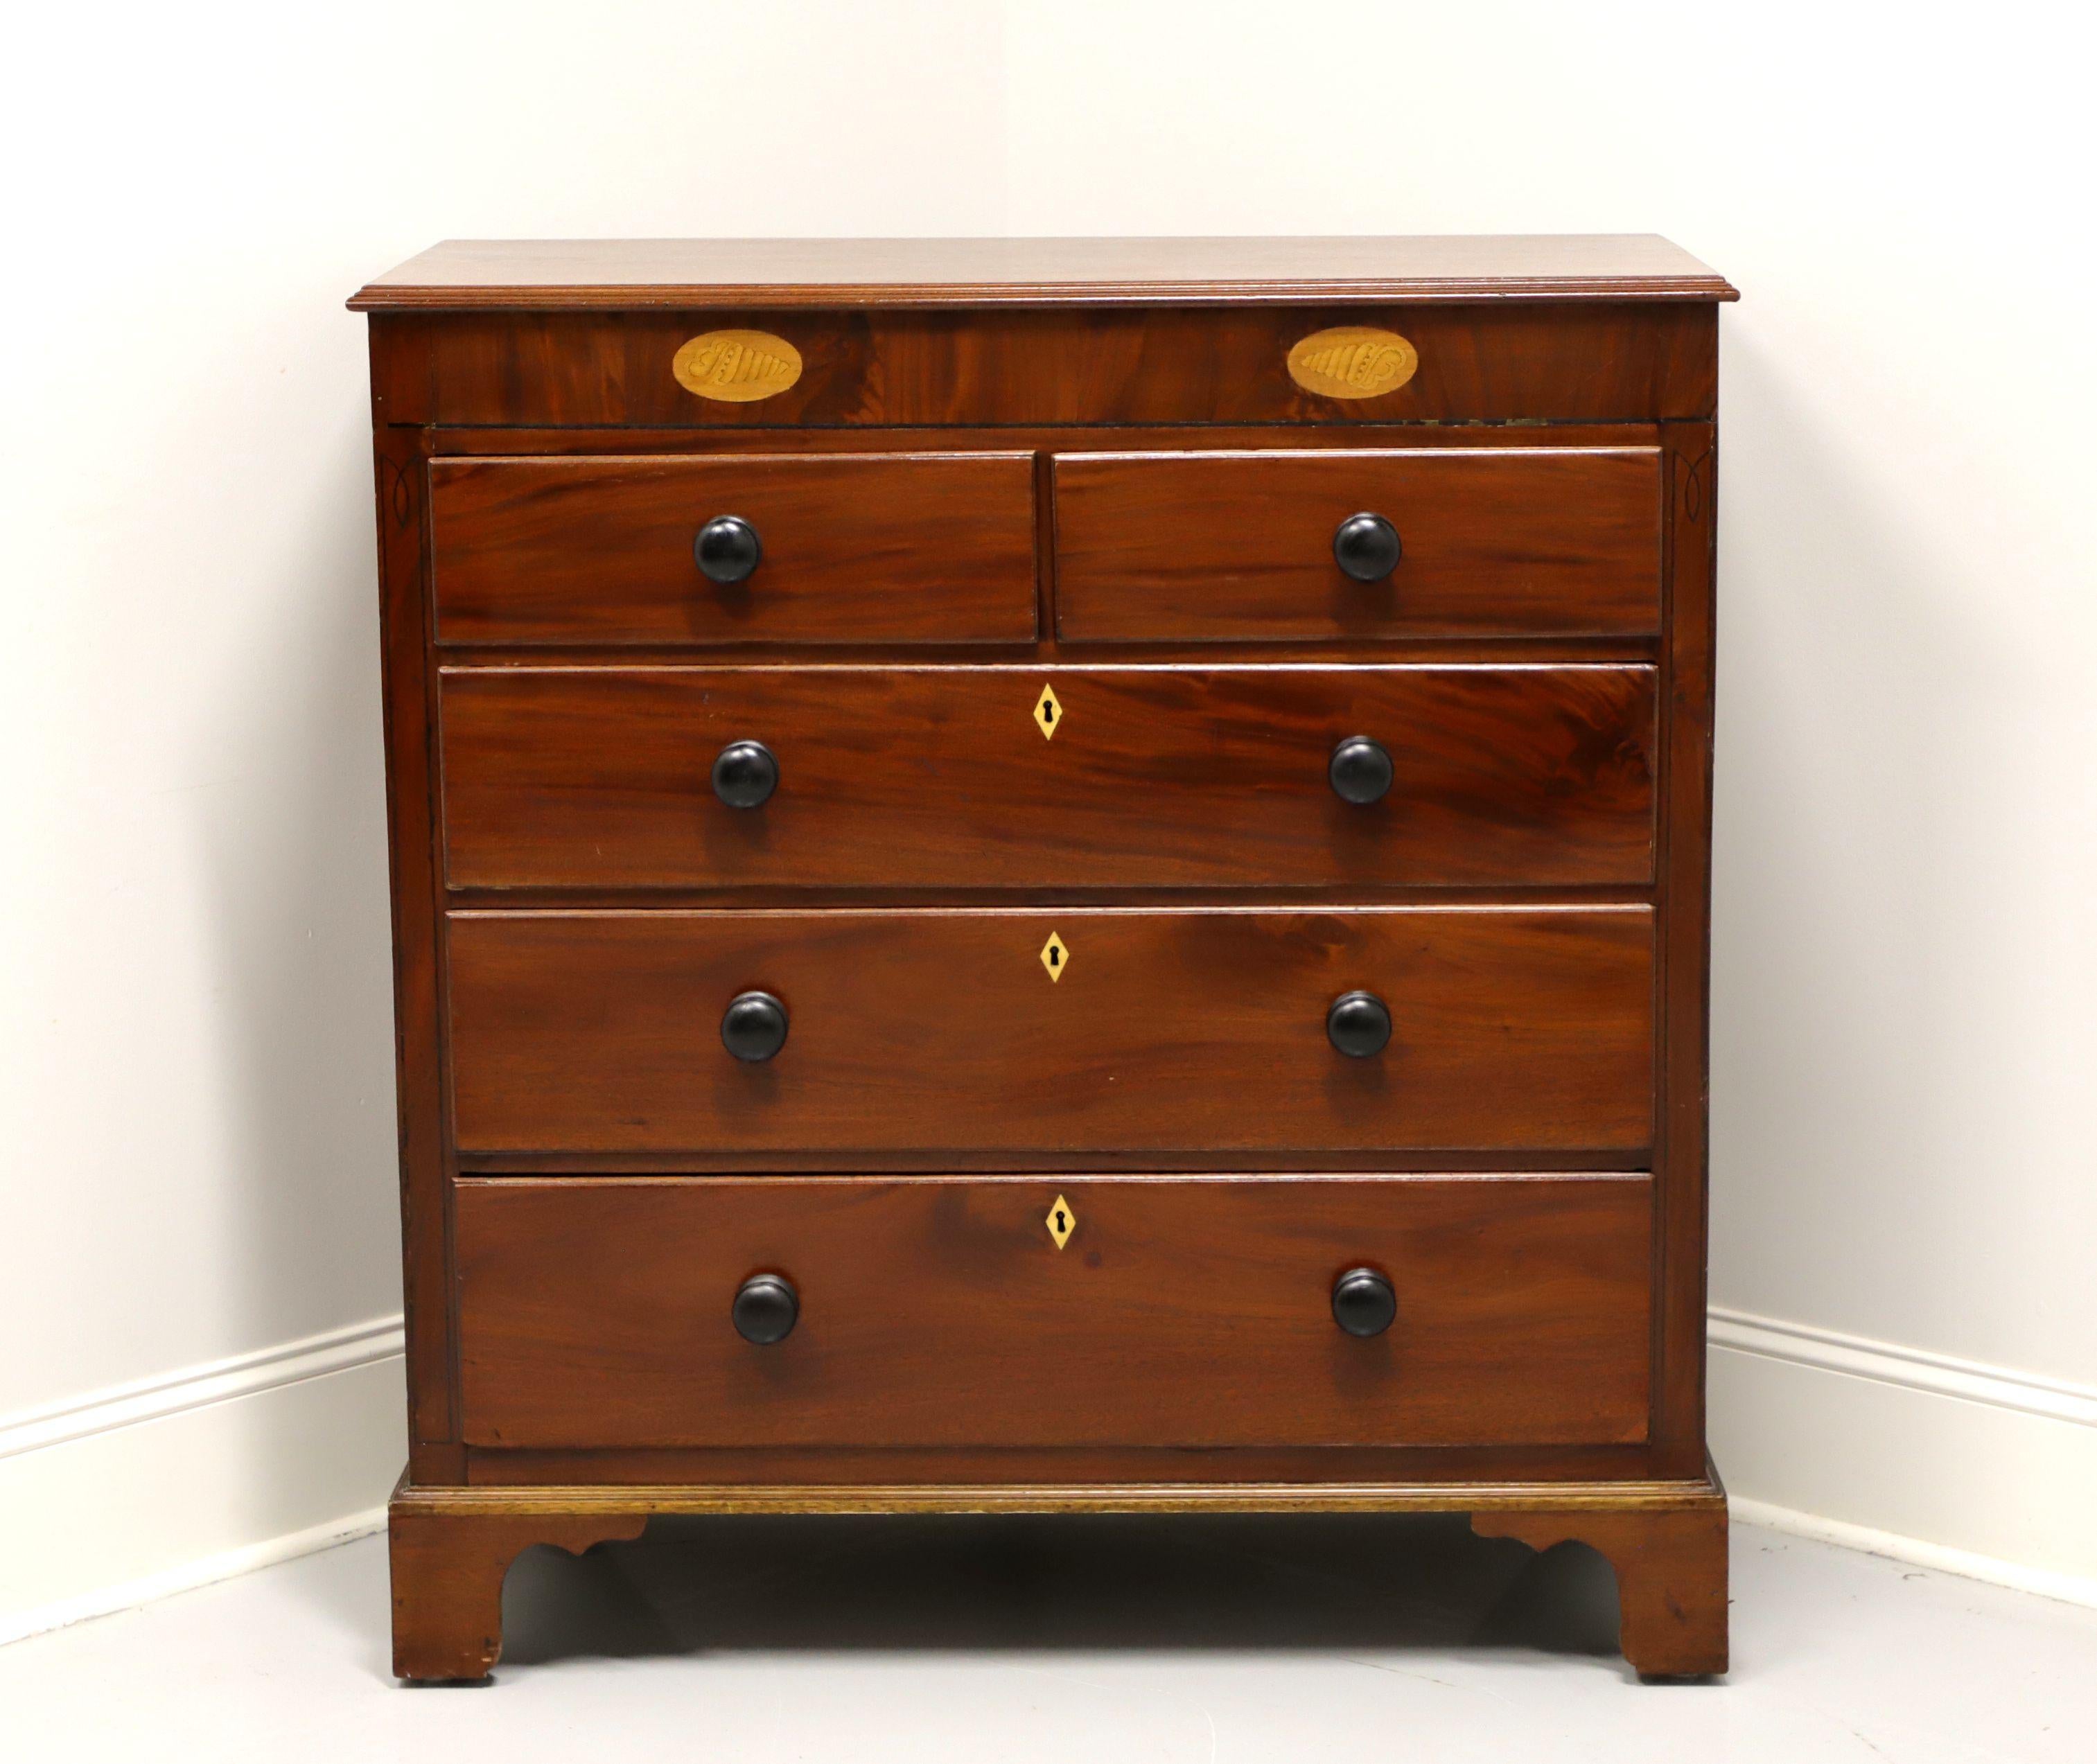 An antique American chest of drawers in the Chippendale style, unbranded. Mahogany, inlaid satinwood, inlaid escutcheons, wood knobs and bracket feet. Features two smaller over three larger dovetail drawers with locks. Made in the USA, in the 19th